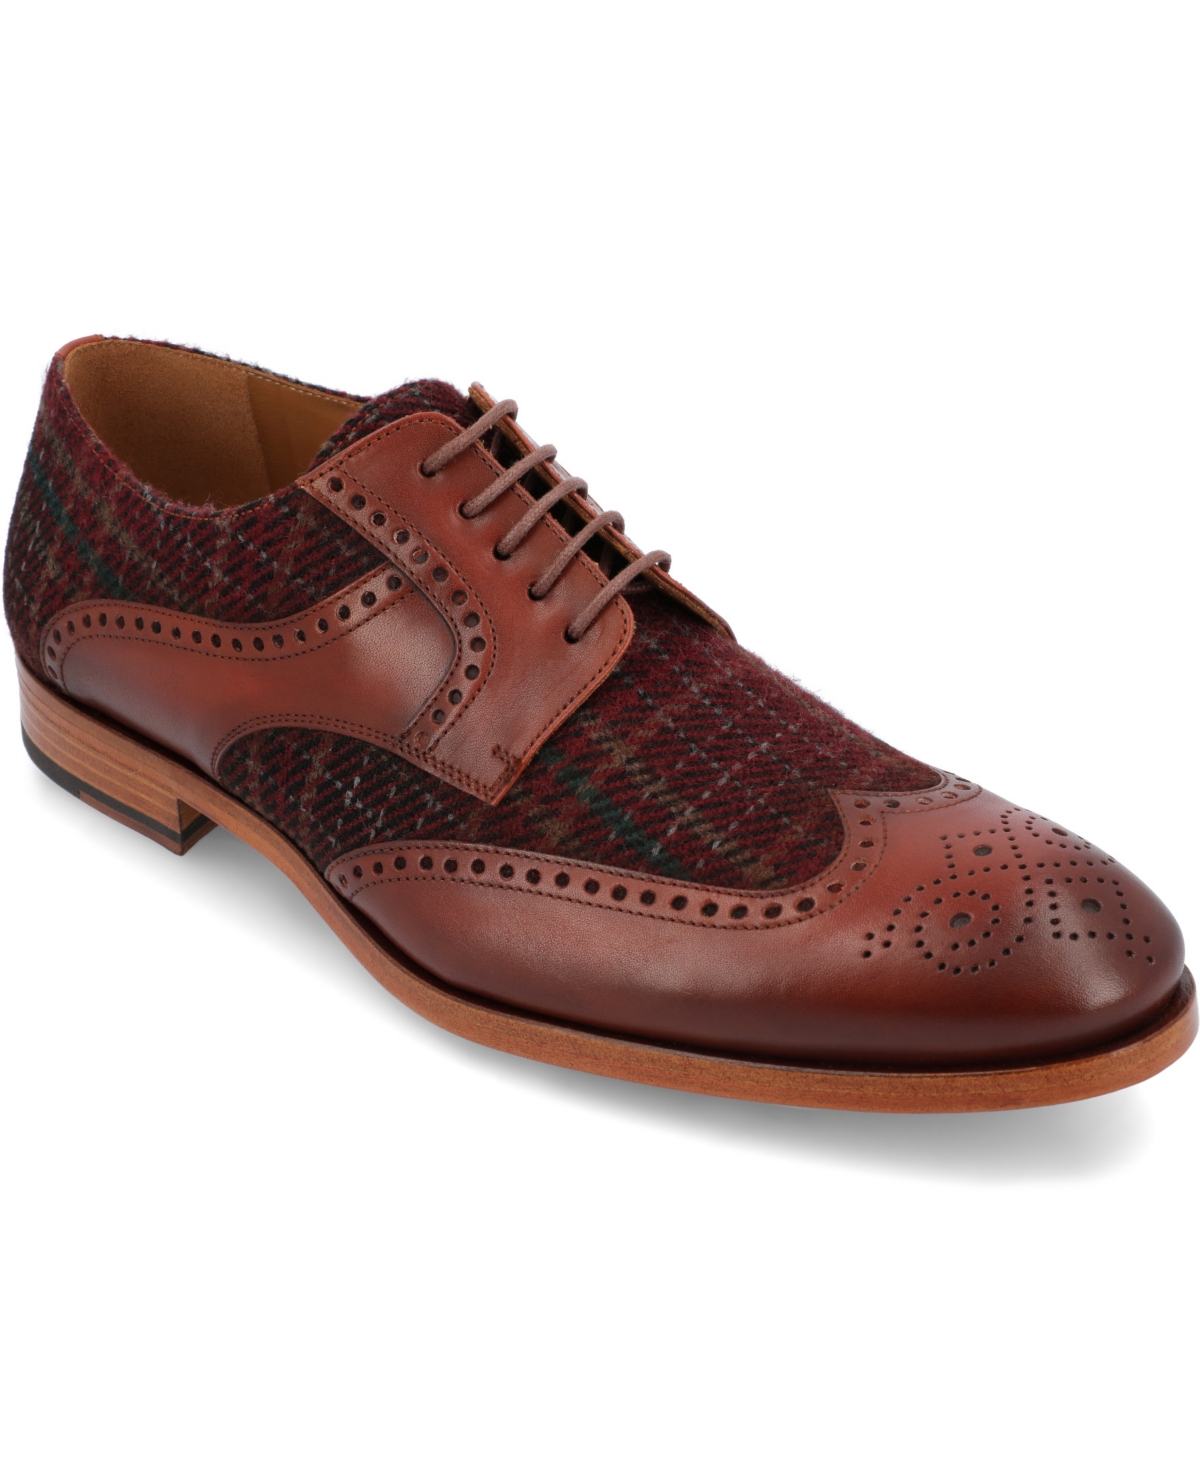 Taft Men's Wallace Handcrafted Leather And Wool Brogue Wingtip Oxford Lace-up Dress Shoe In Red Plaid